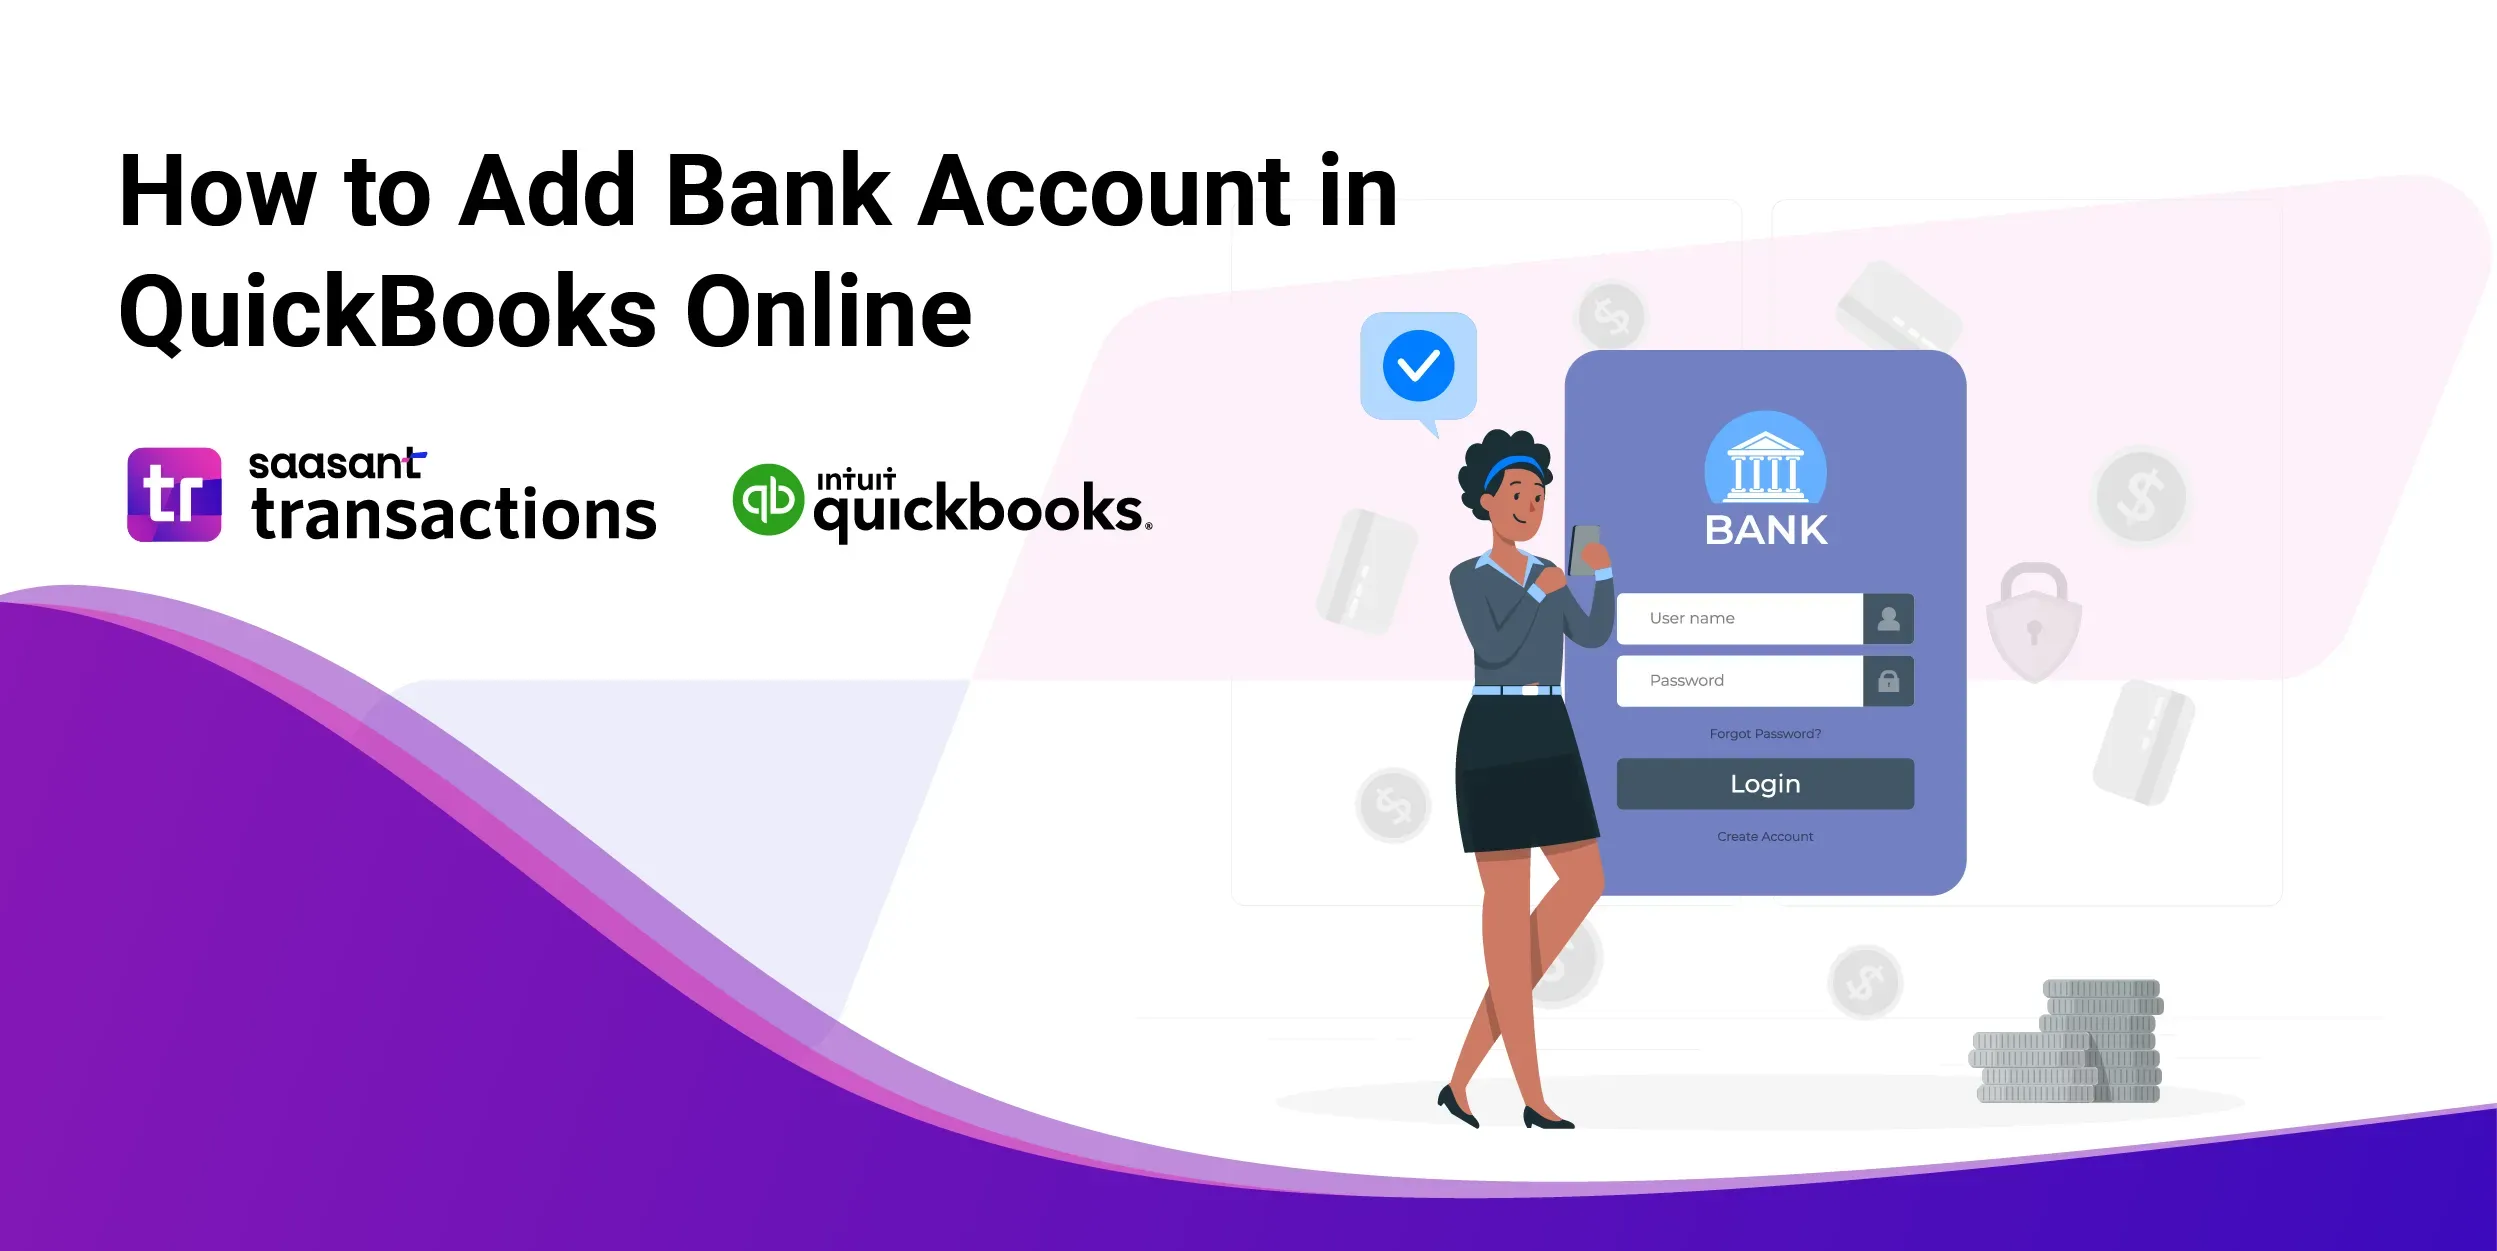 How to Add Bank Account in QuickBooks Online